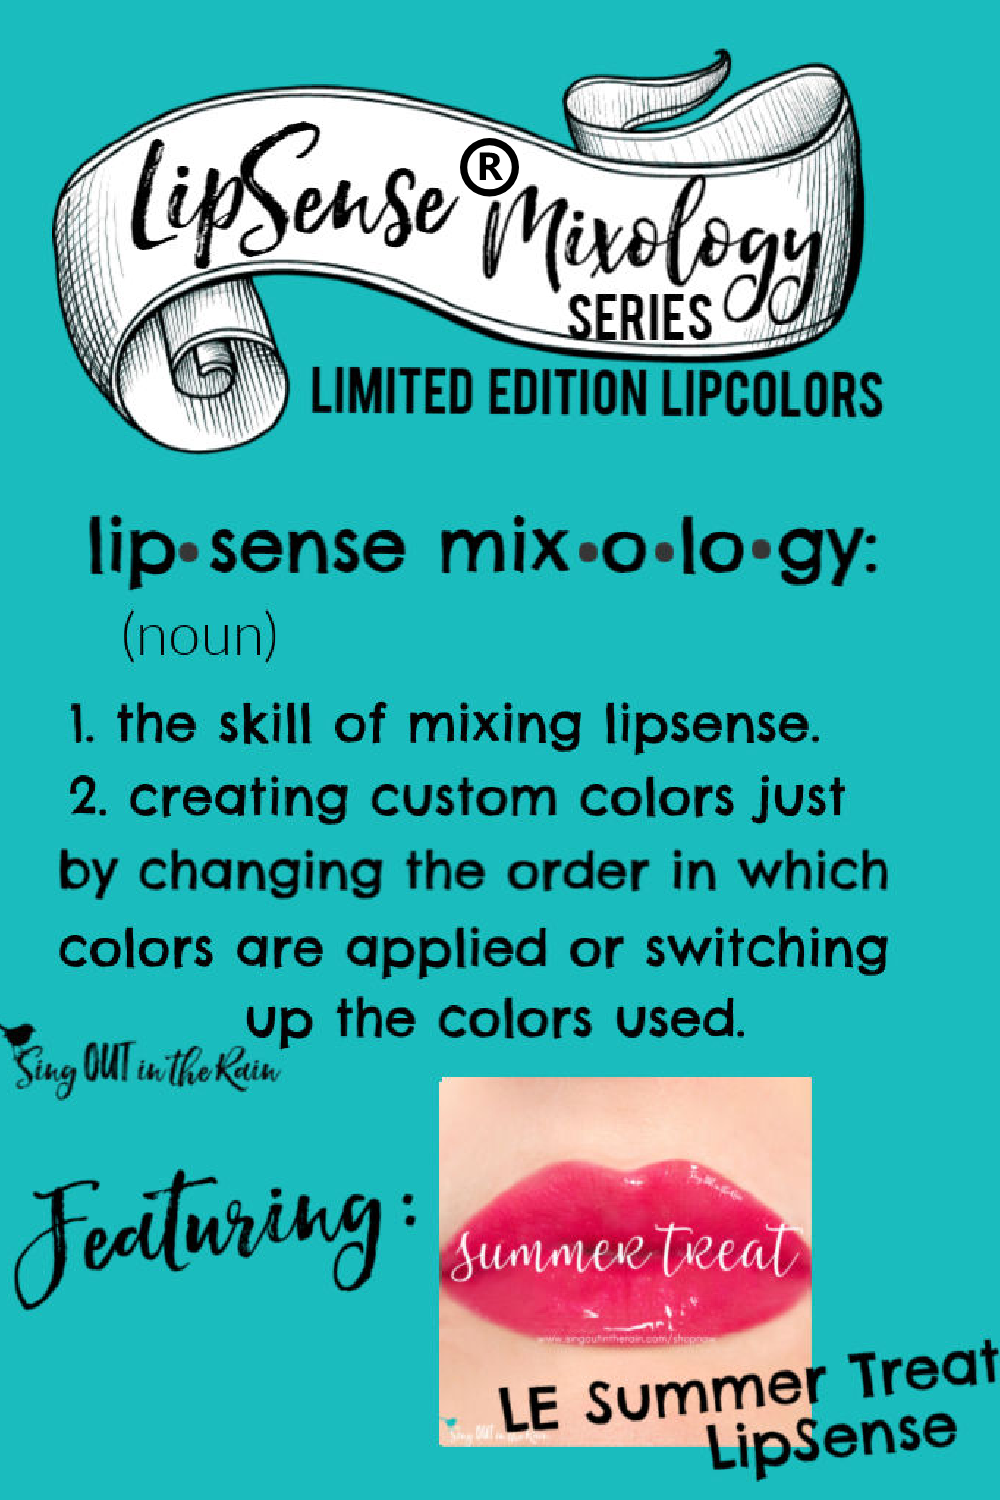 The Ultimate Guide to Summer Treat LipSense Mixology